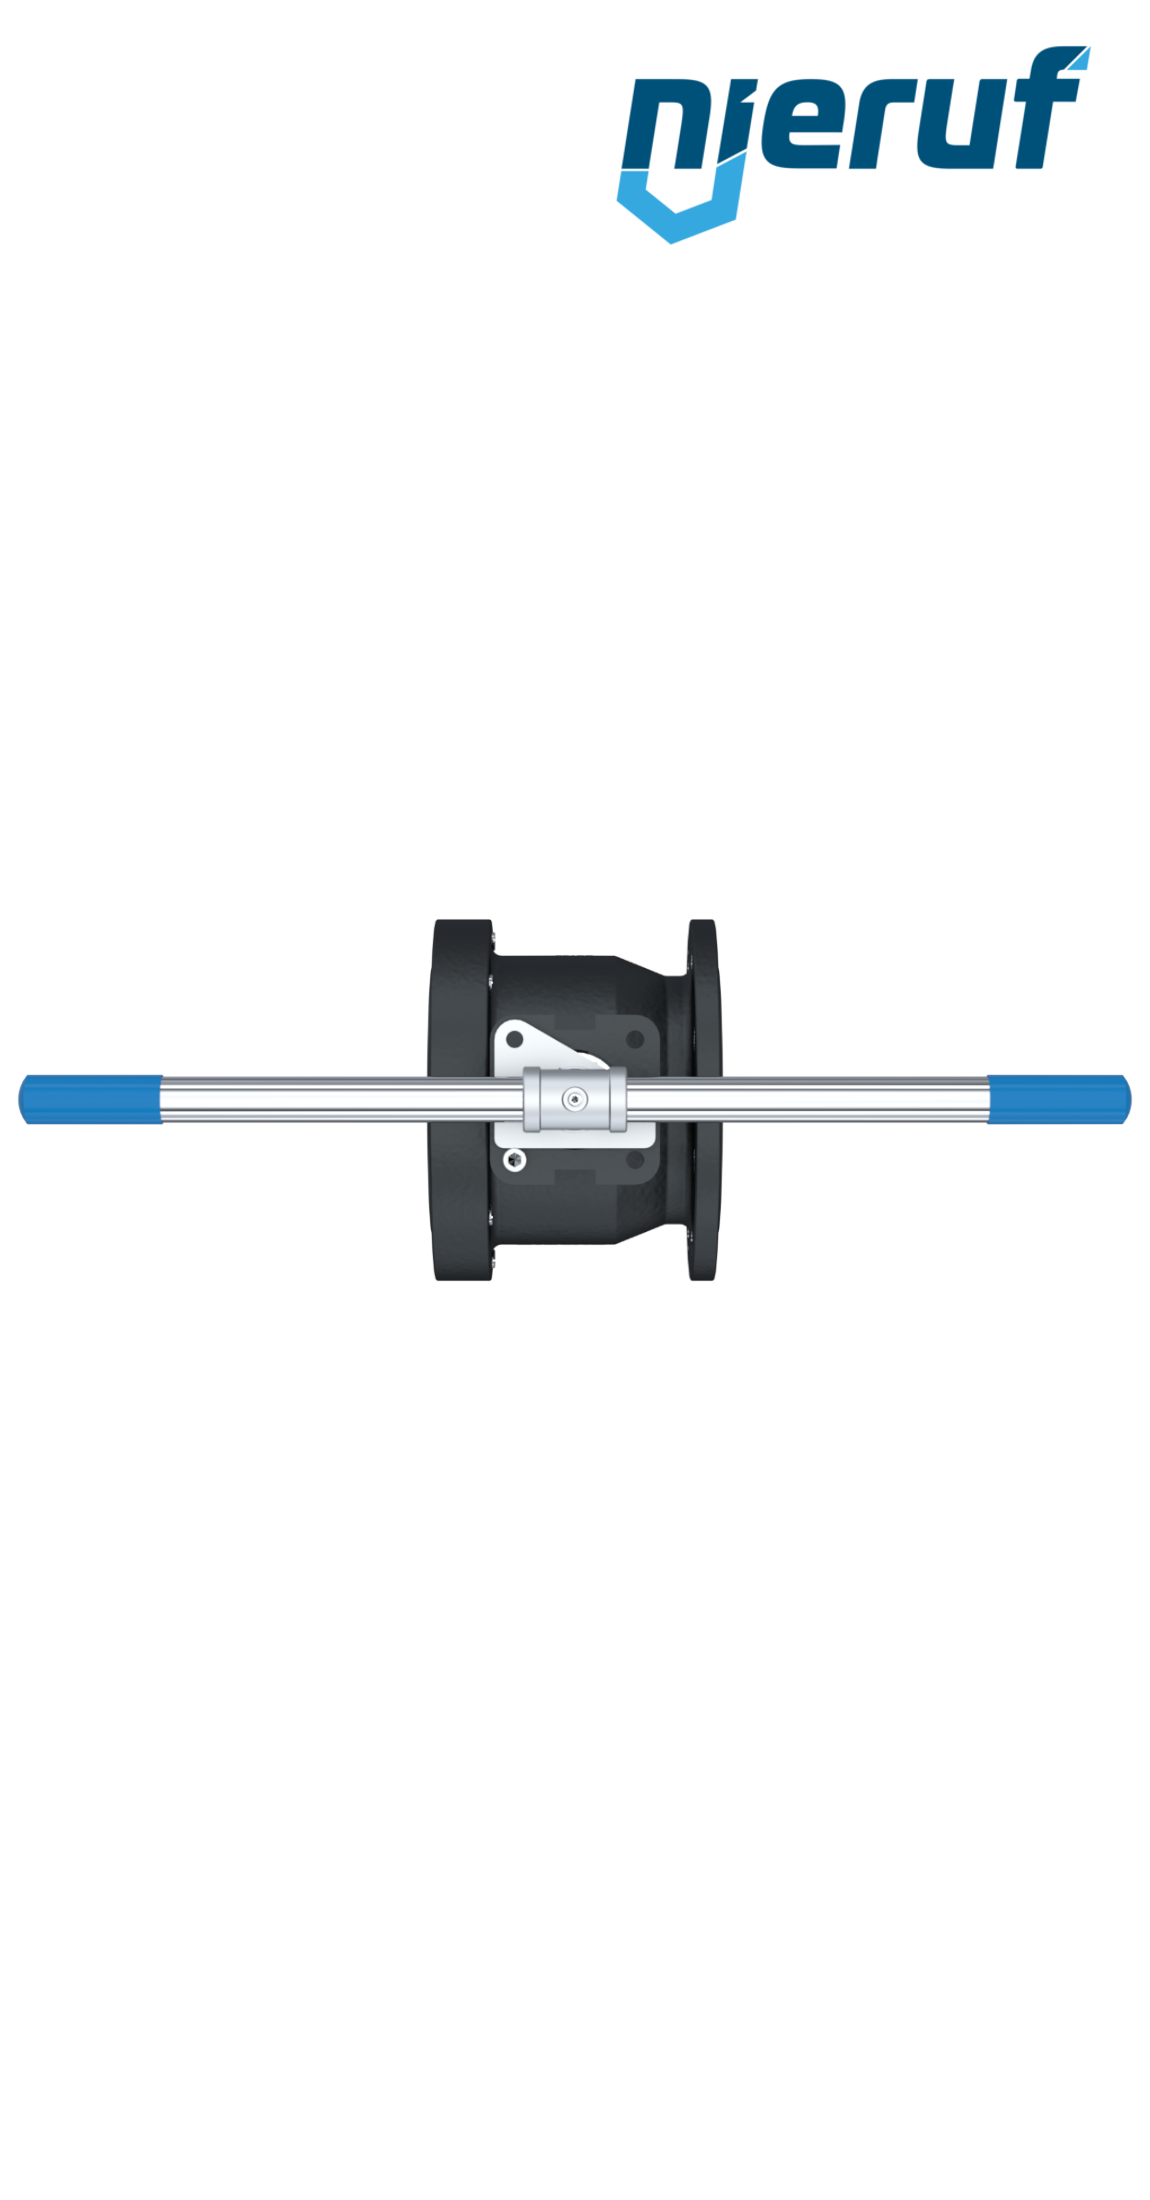 Compact ball valve DN100 PN16 FK03 carbon steel 1.0619 ball stainless steel 1.4408